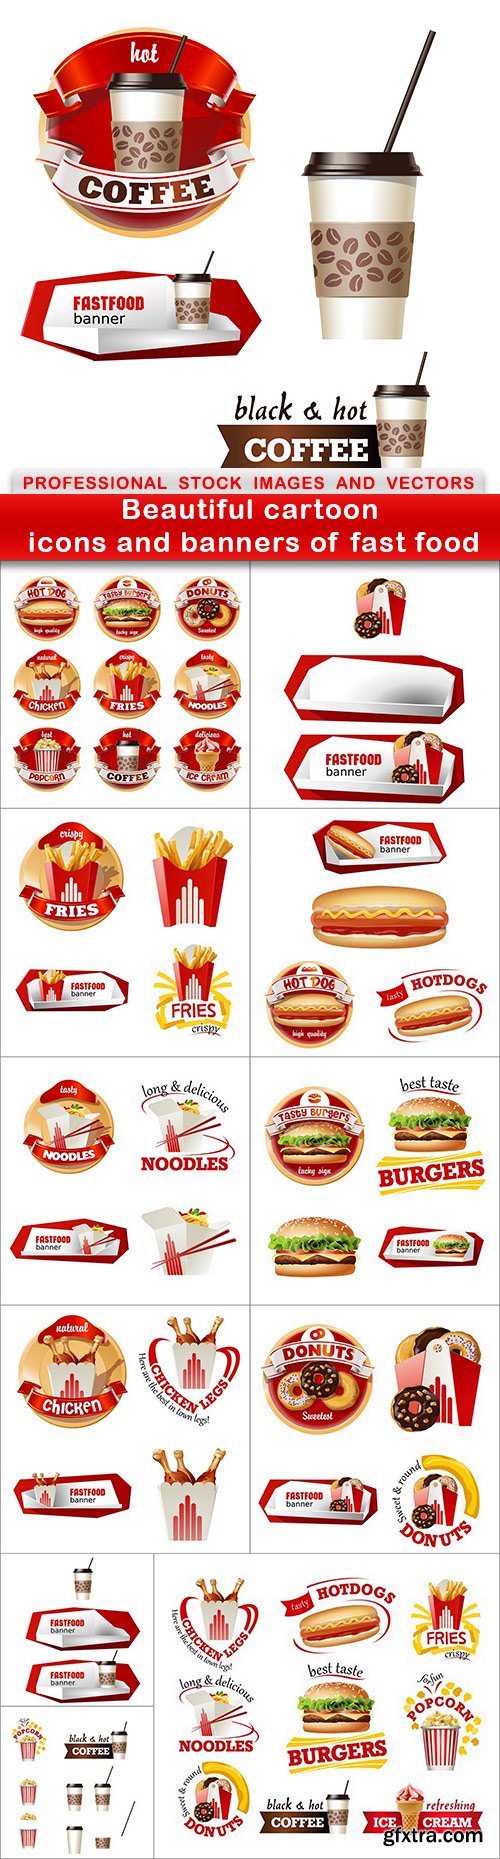 Beautiful cartoon icons and banners of fast food - 12 EPS